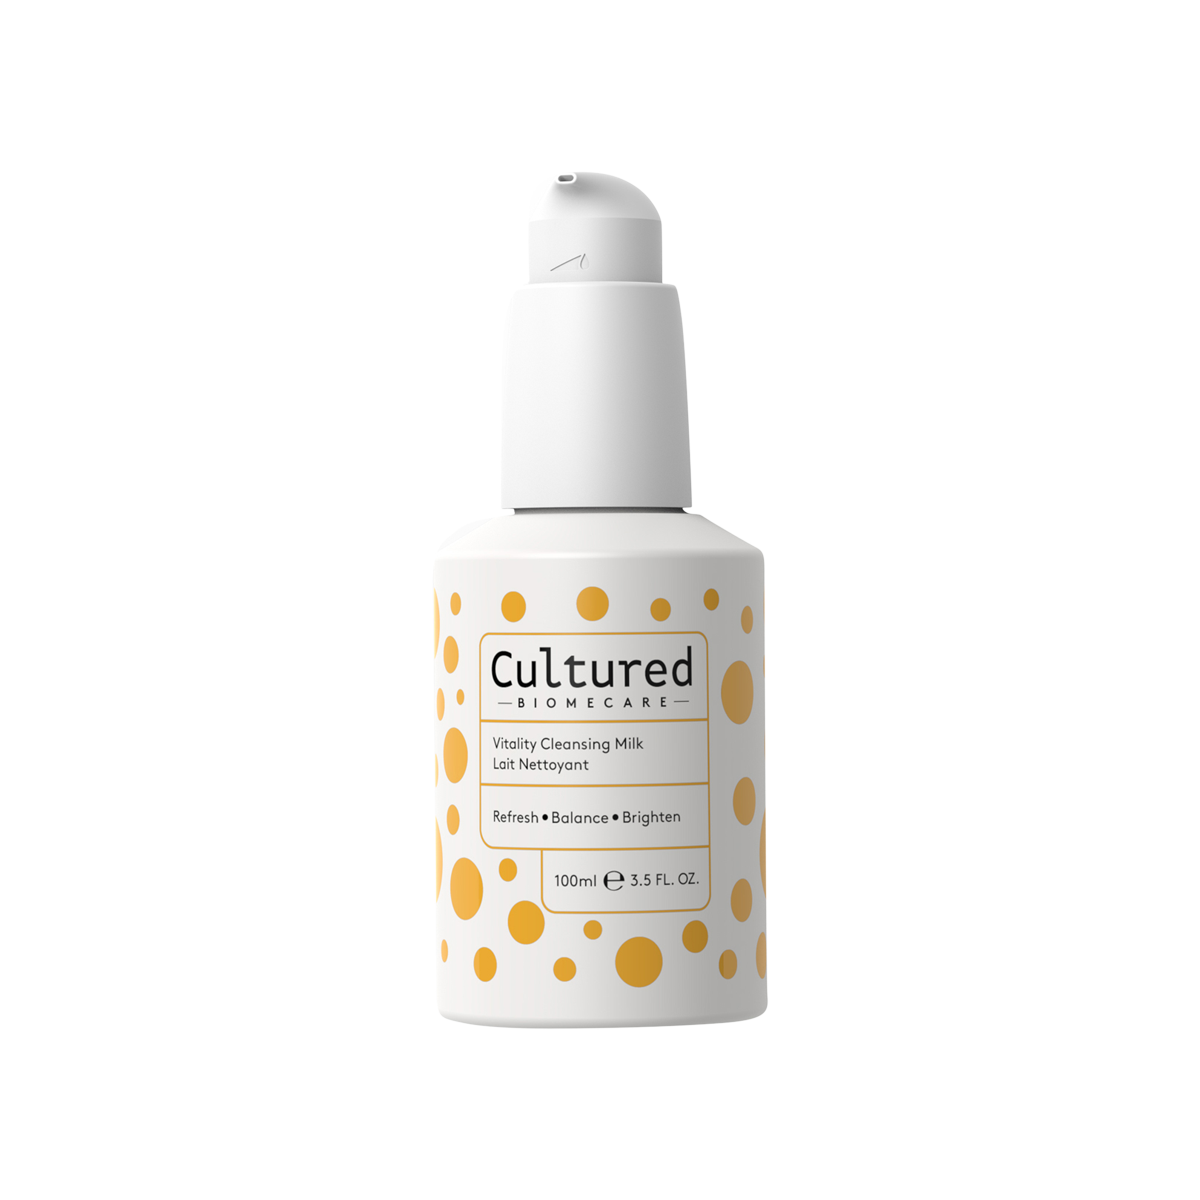 Cultured - Vitality Cleansing Milk